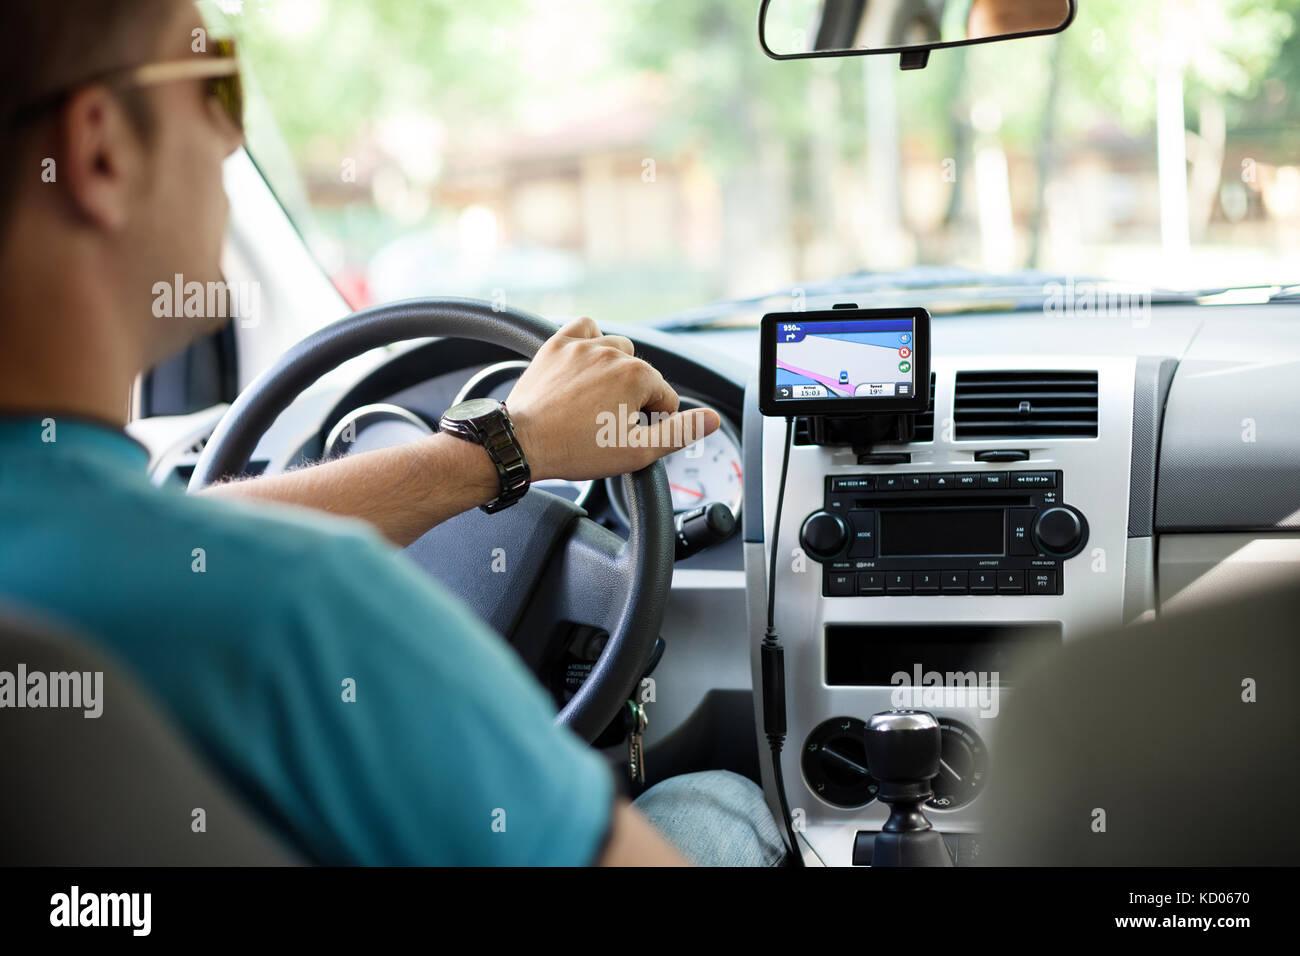 GPS navigation in interior of luxury car Stock Photo